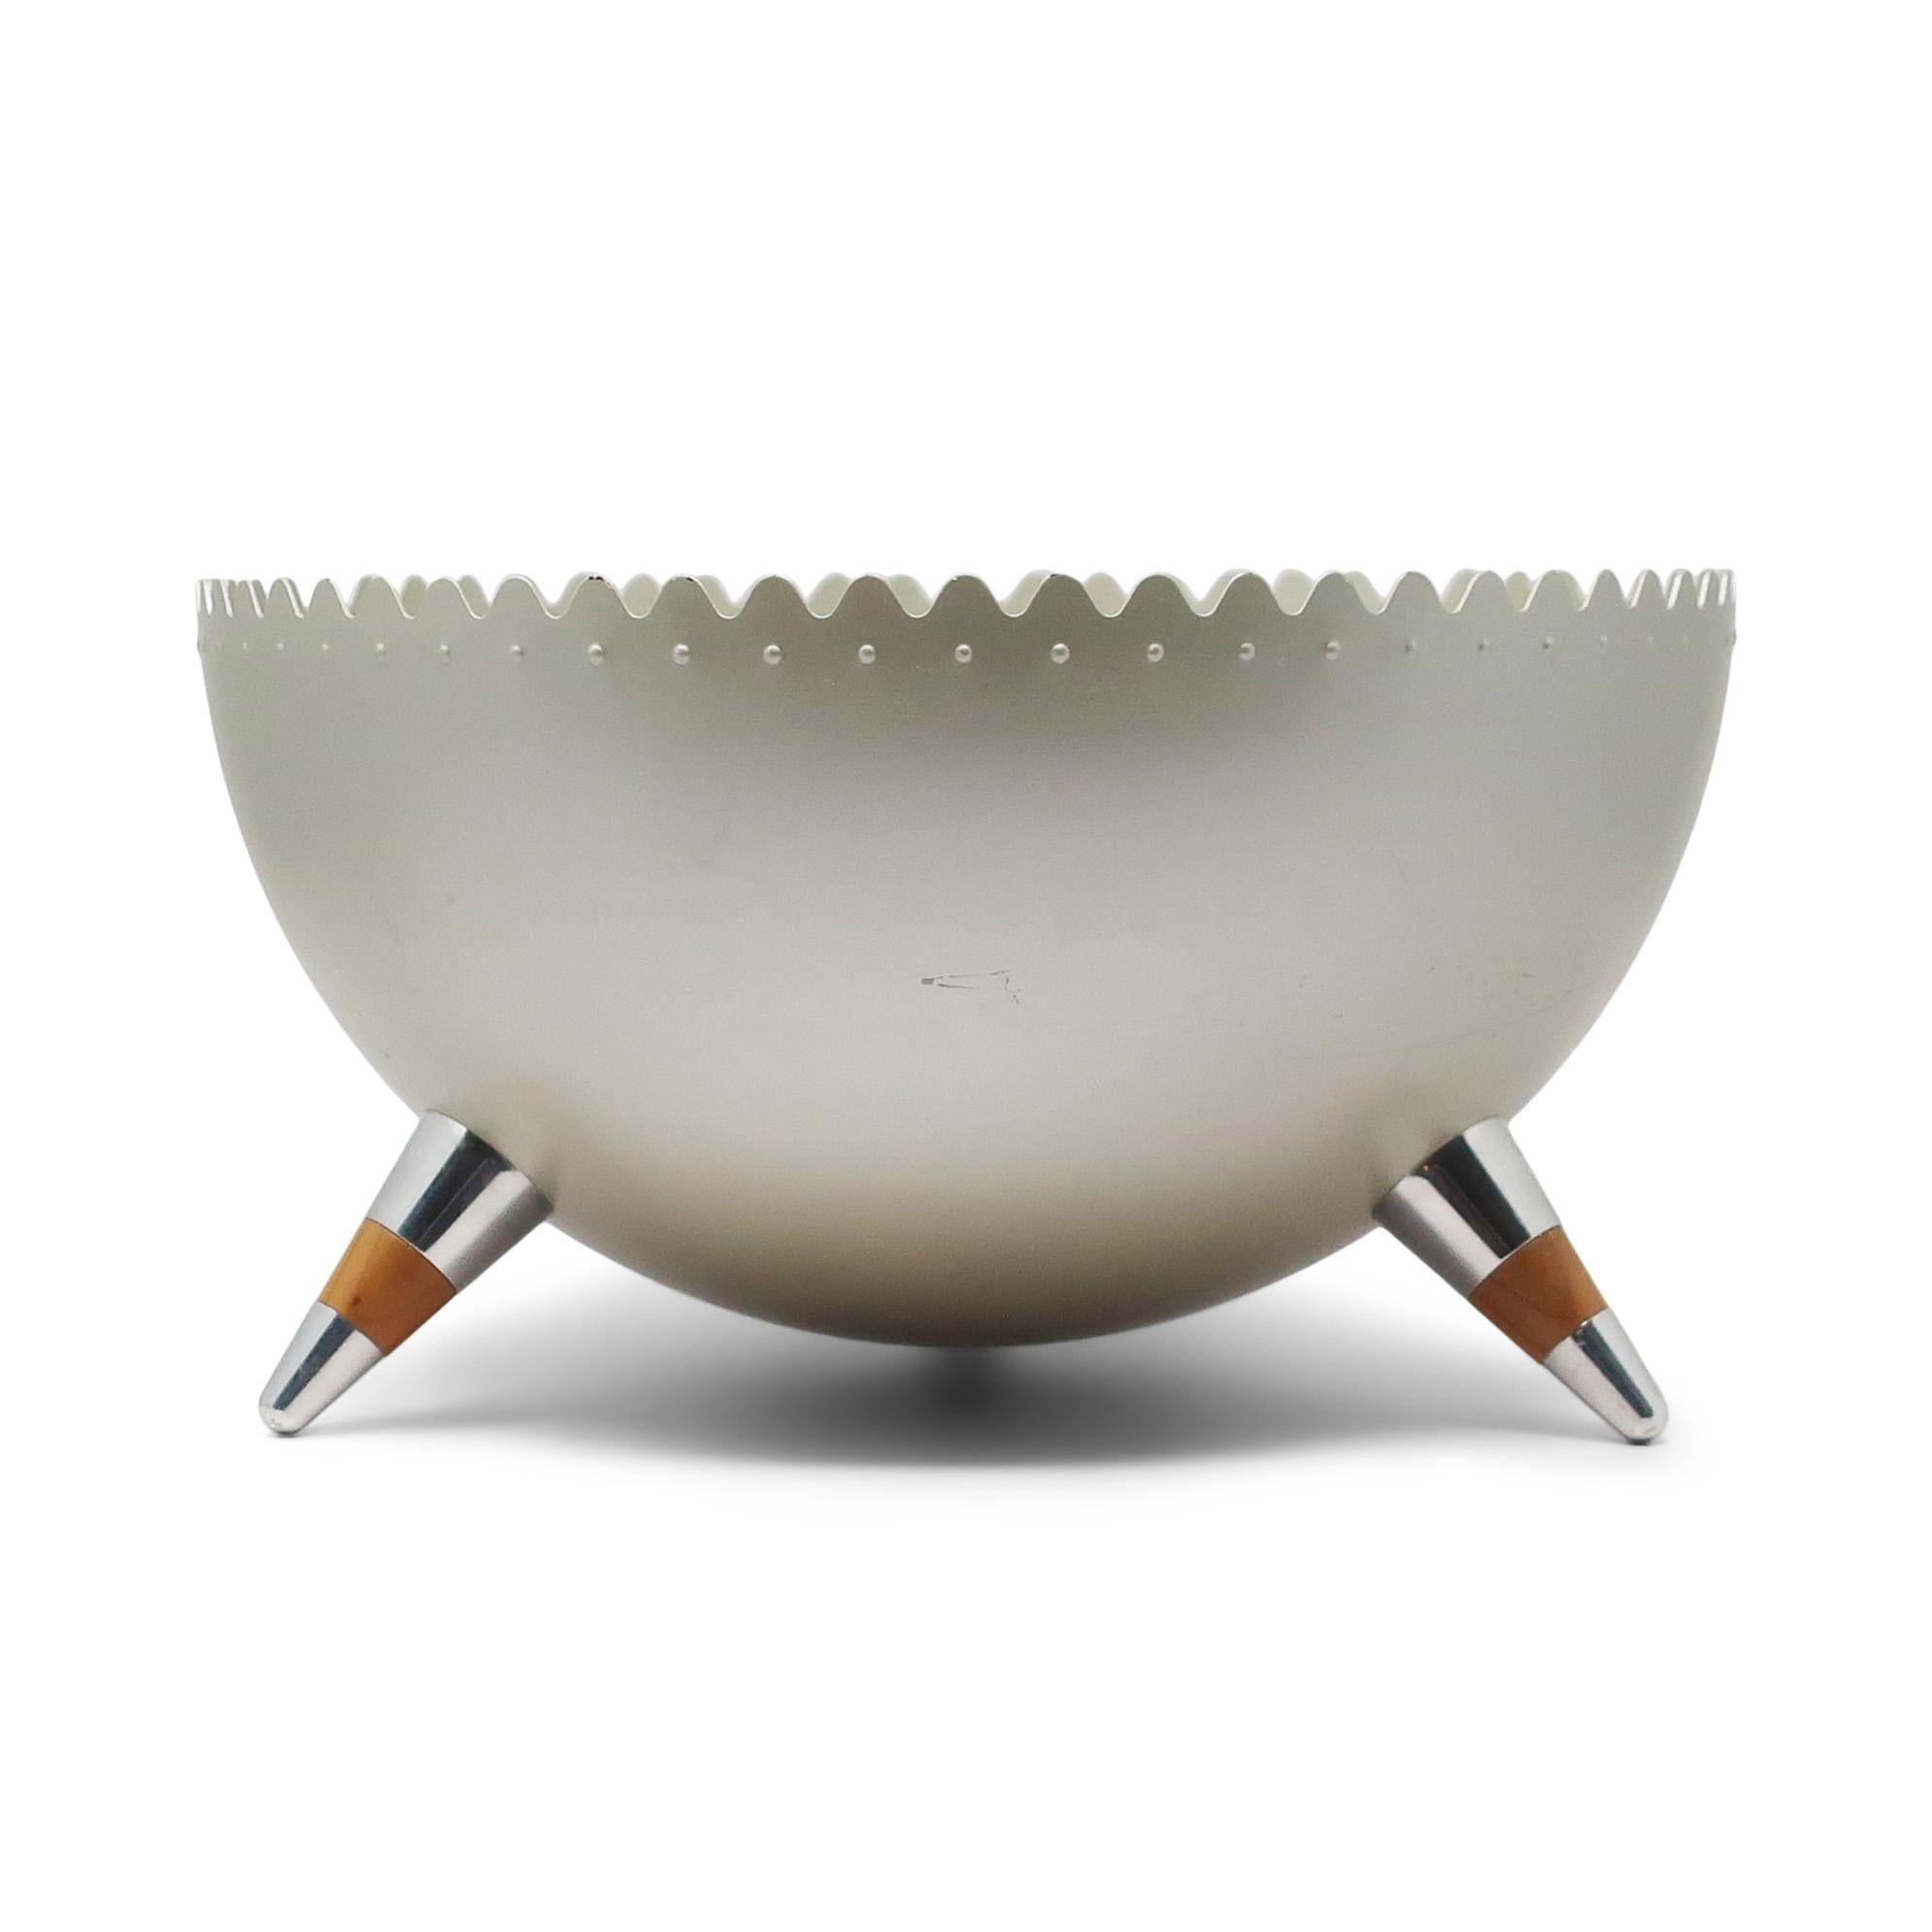 With the design for the Chimu bowl, British designer Joanna Lyle won a design competition organized by Alessi in 1990 to identify young designers from all over the world.  A simple and striking design inspired by the creations of the pre-Columbian